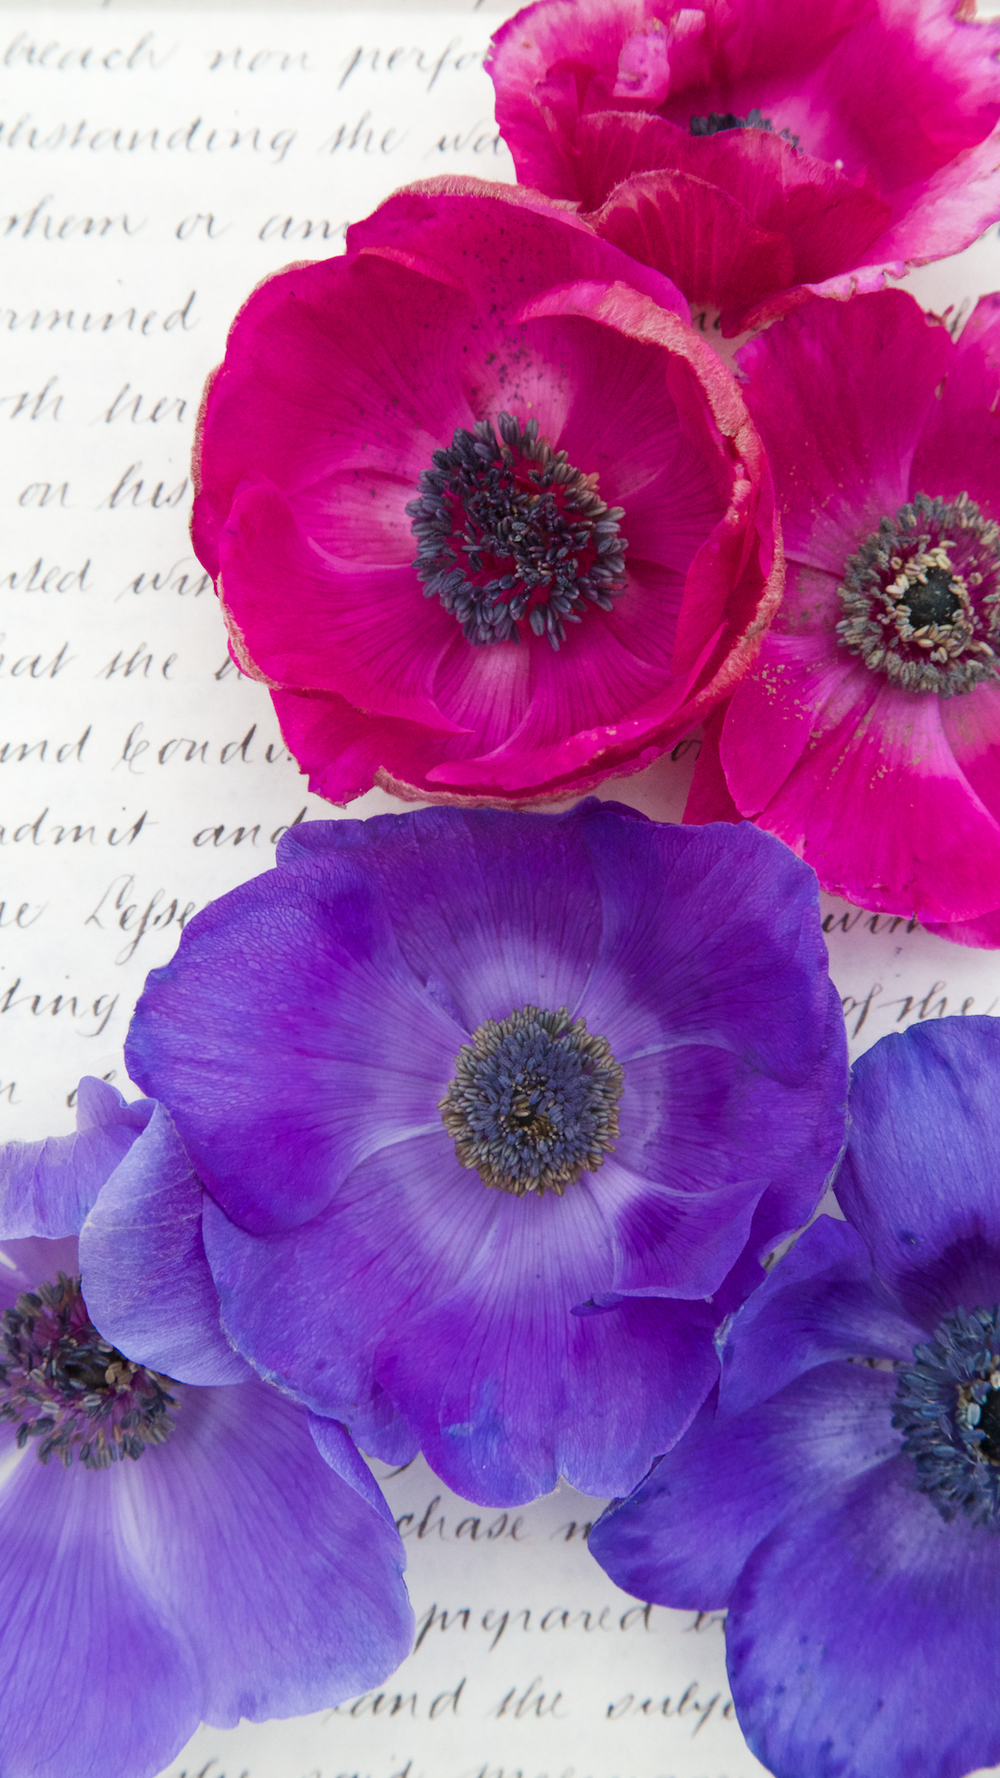 Free winter botanical phone wallpapers â ranunculus and anemone collection â photo backdrops uk from capture by lucy